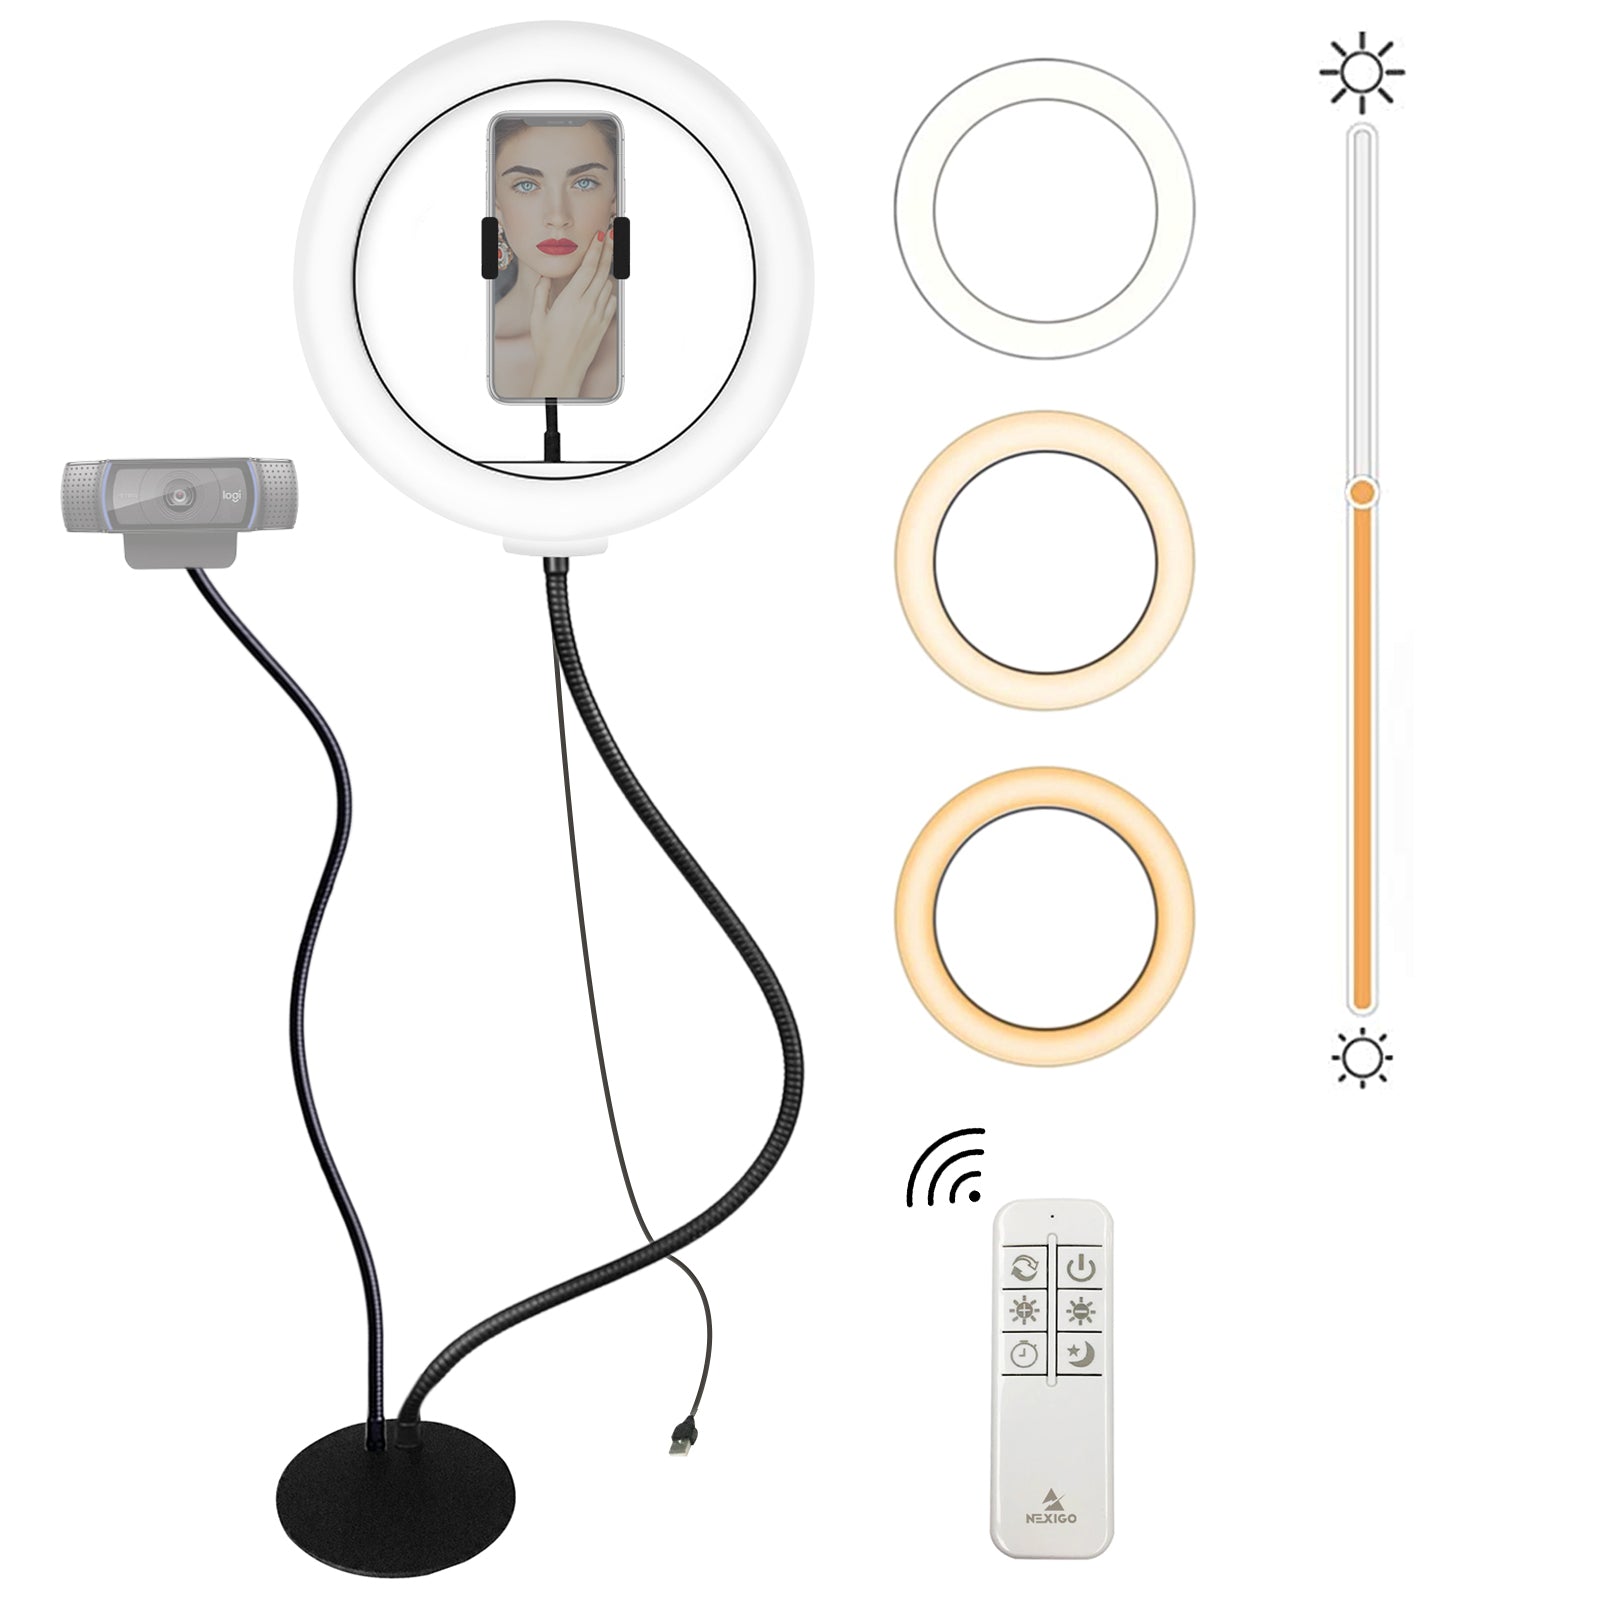 The 10'' selfie ring light with a remote allows for three different light adjustments.